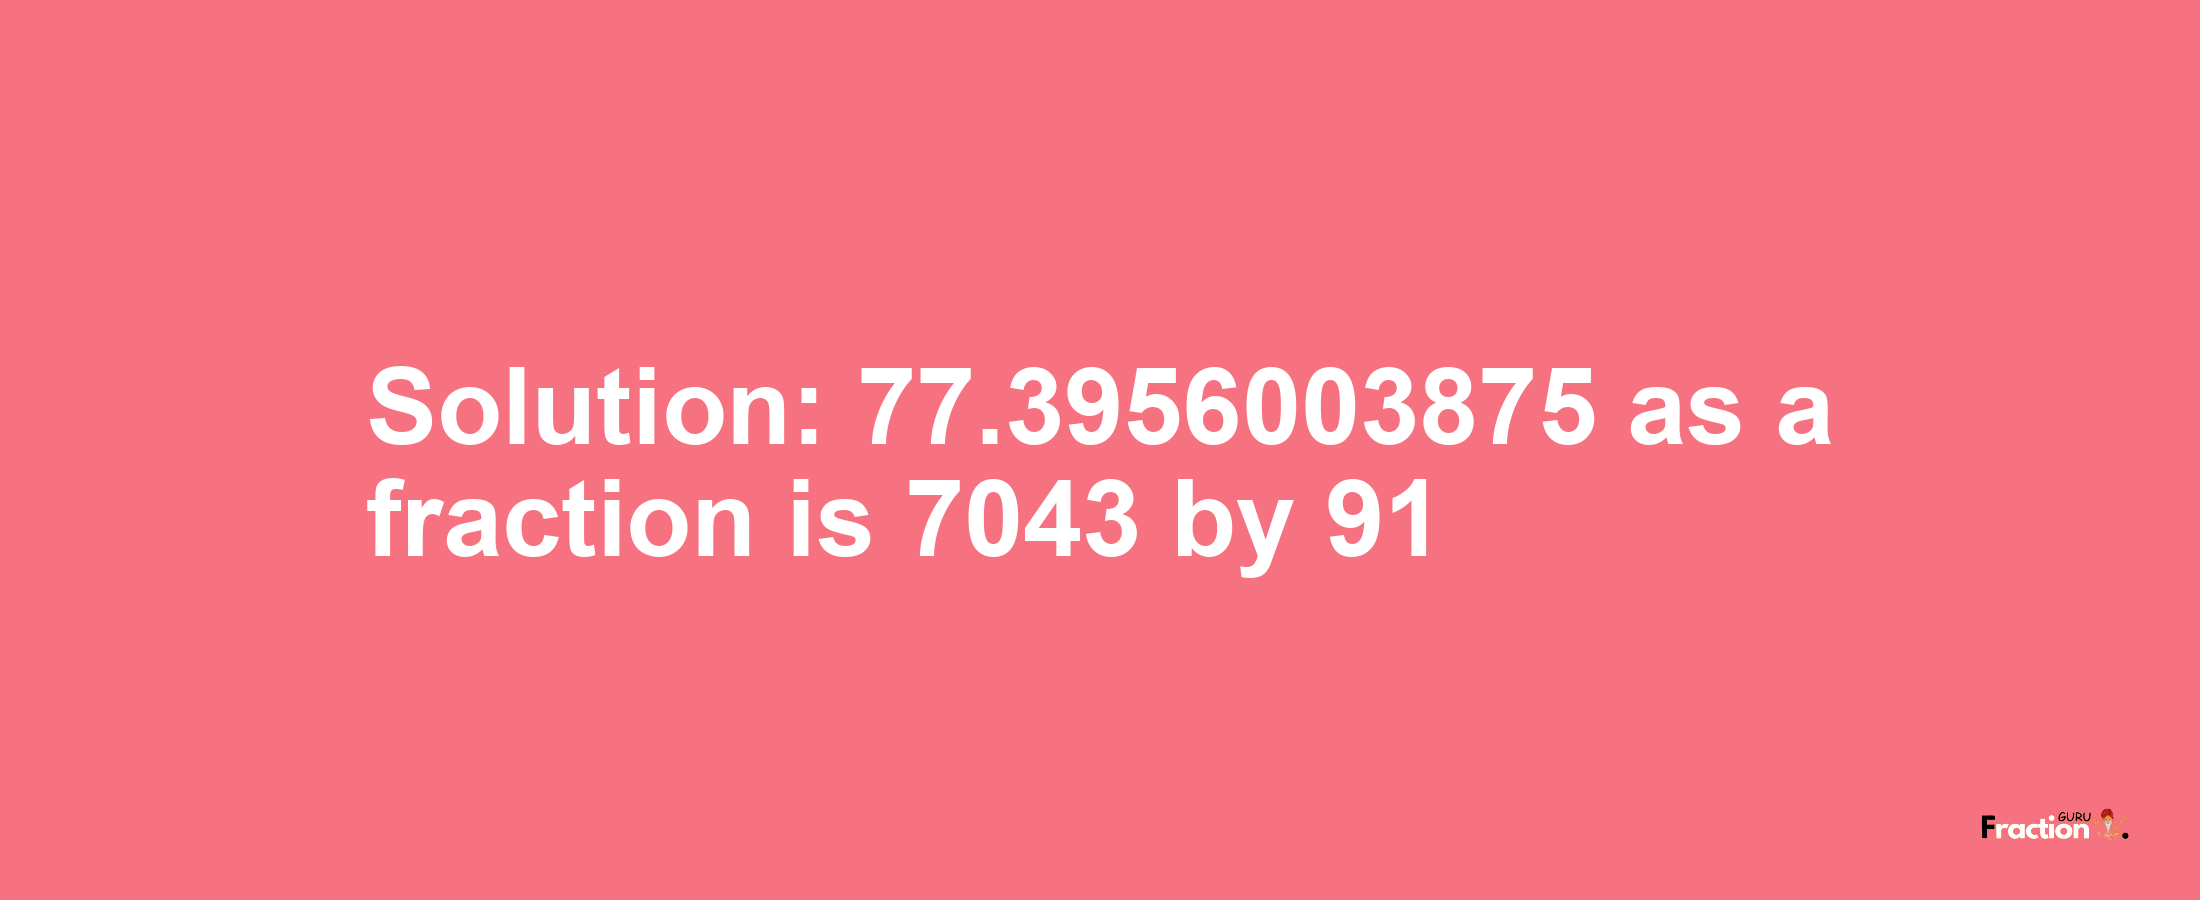 Solution:77.3956003875 as a fraction is 7043/91